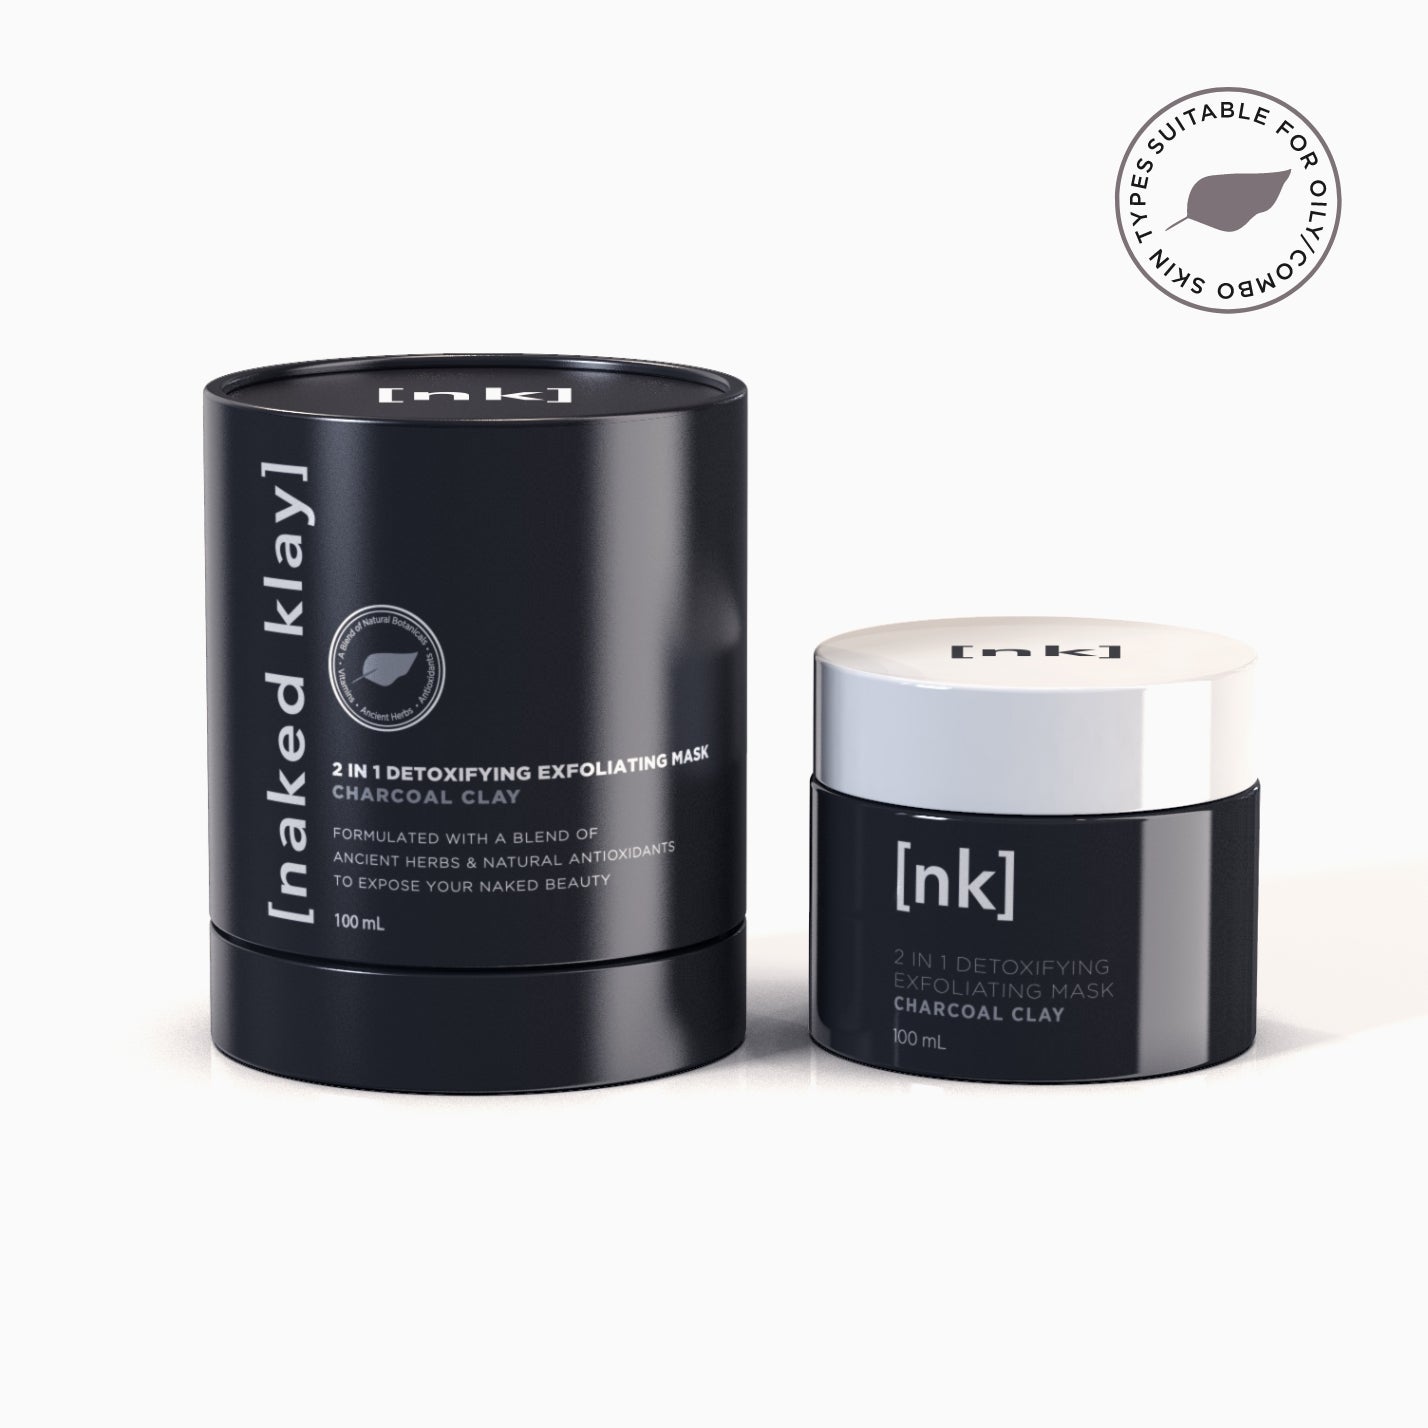 2 In 1 Detoxifying Exfoliating Mask - Charcoal Clay